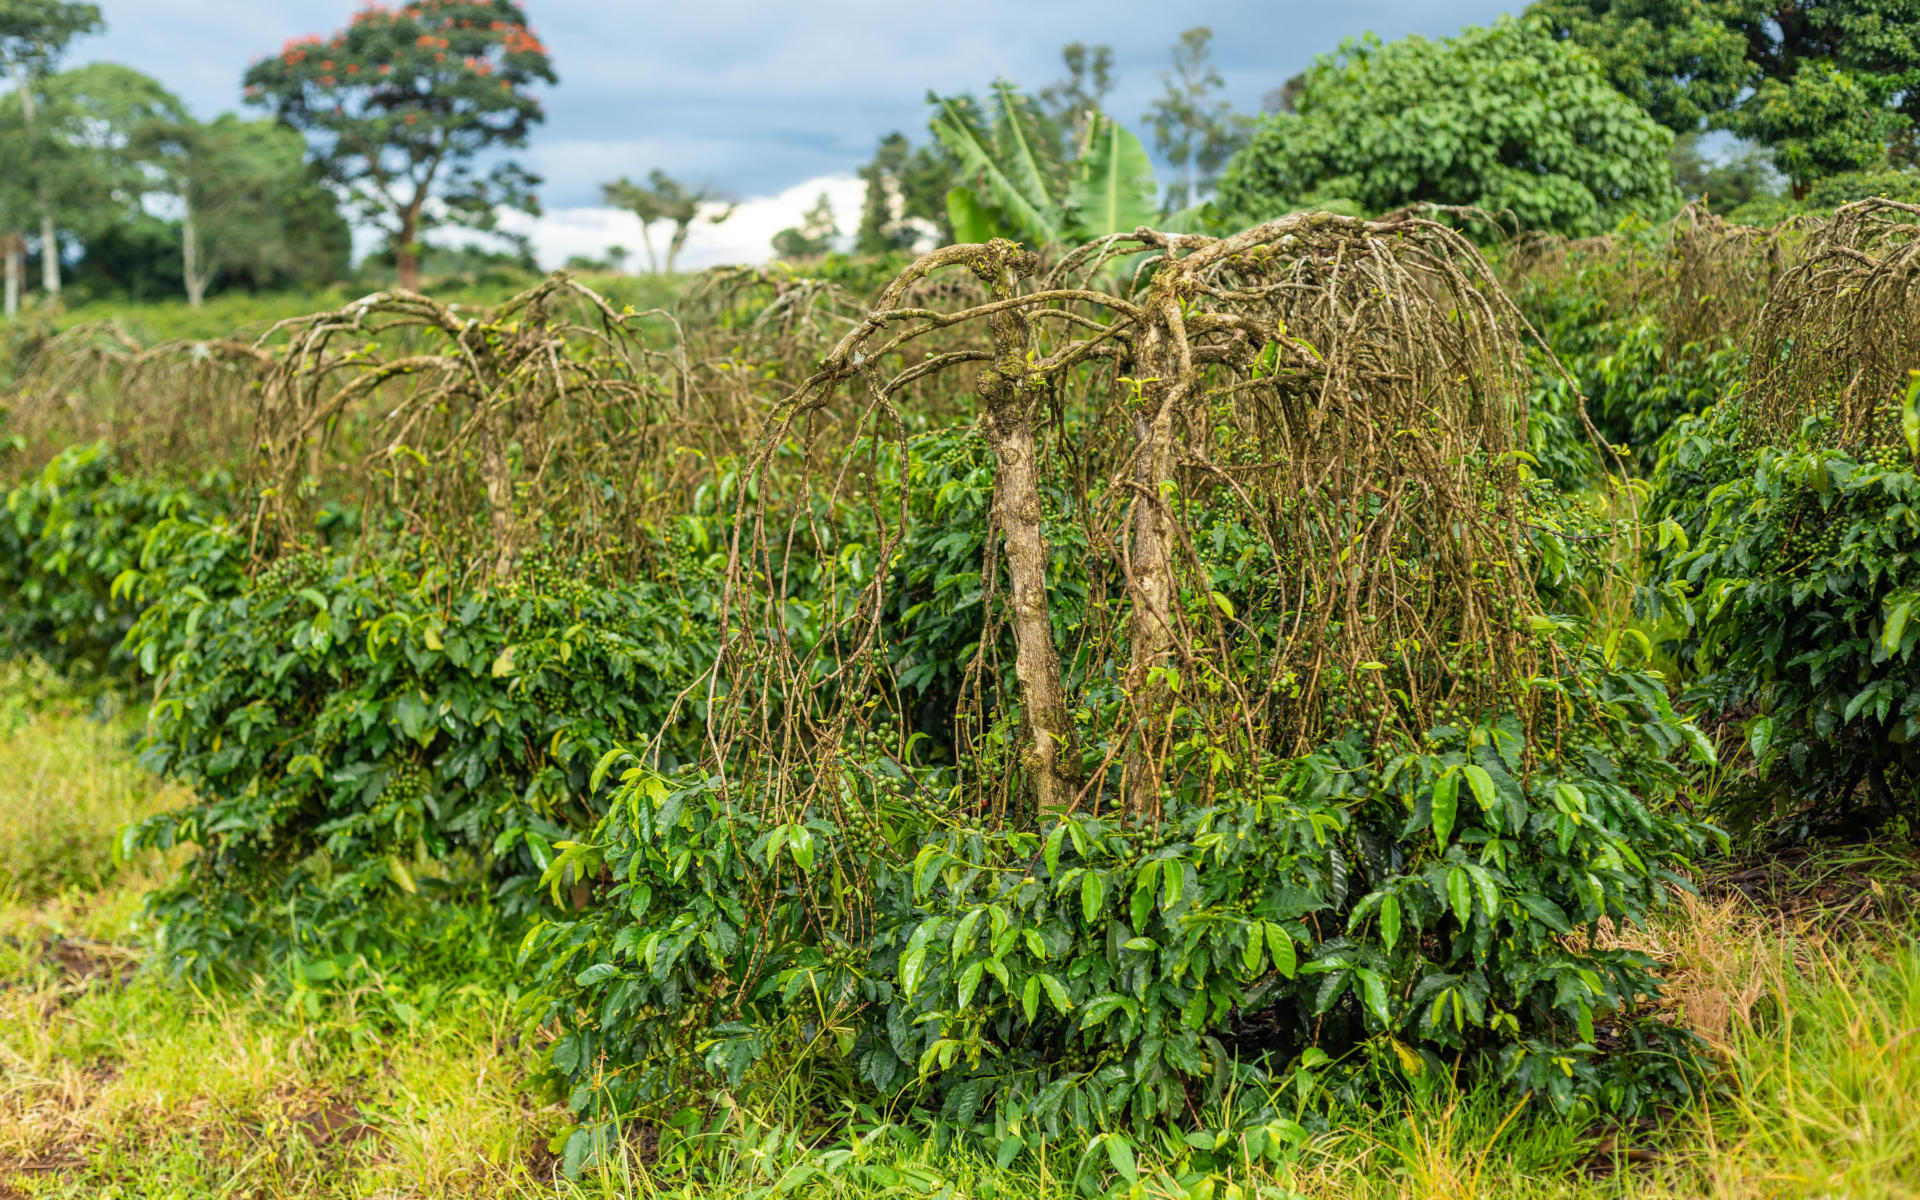 Old coffee trees yield less coffee fruit